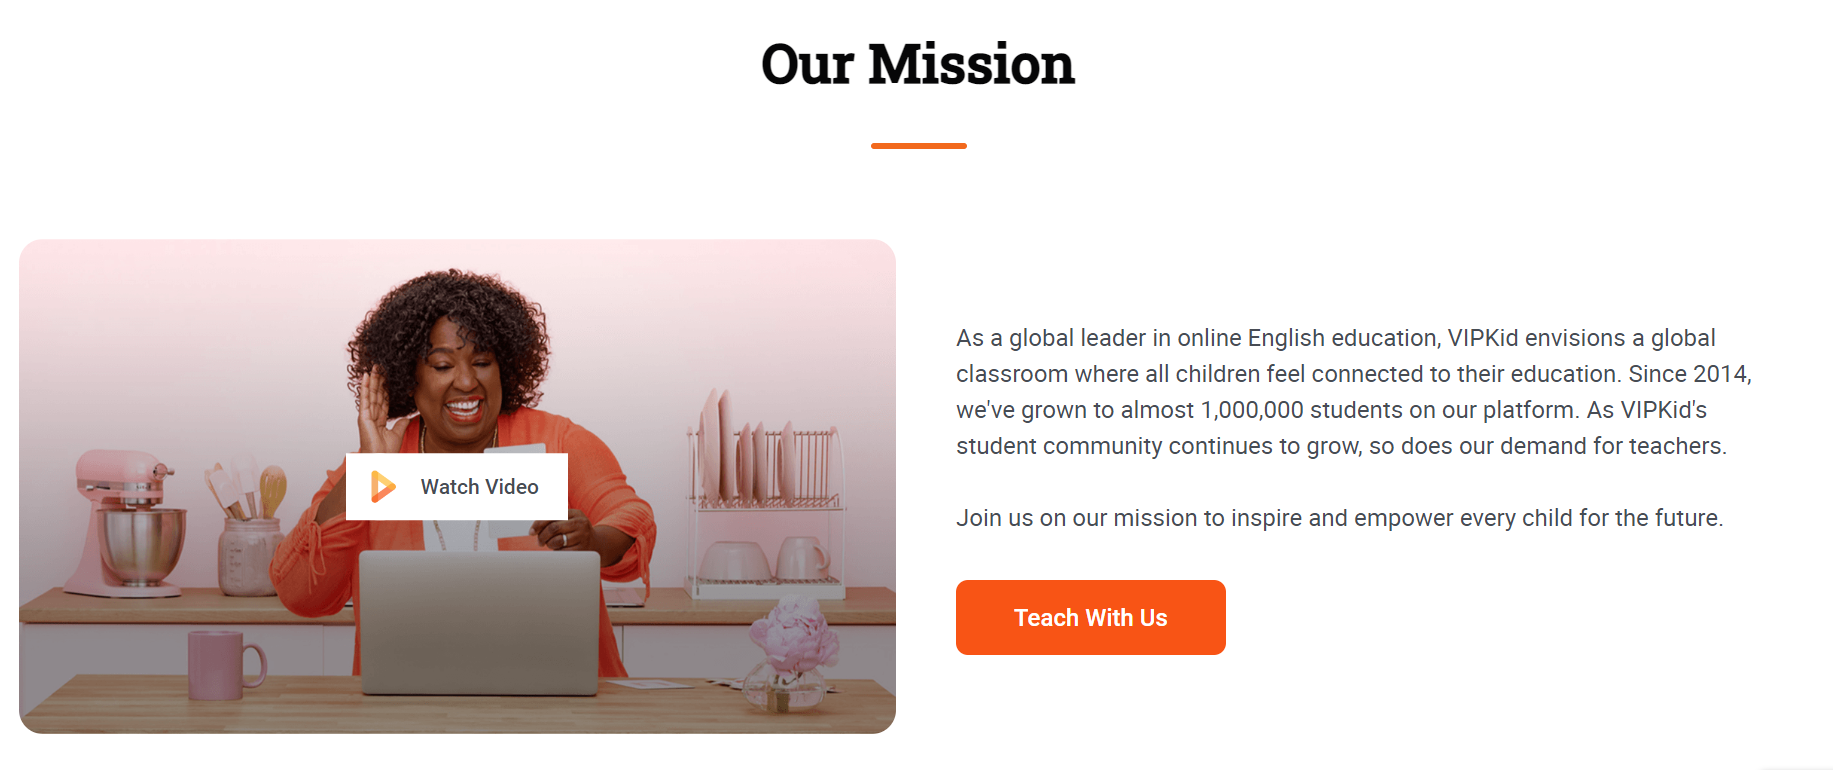 What can be expected from vipkid